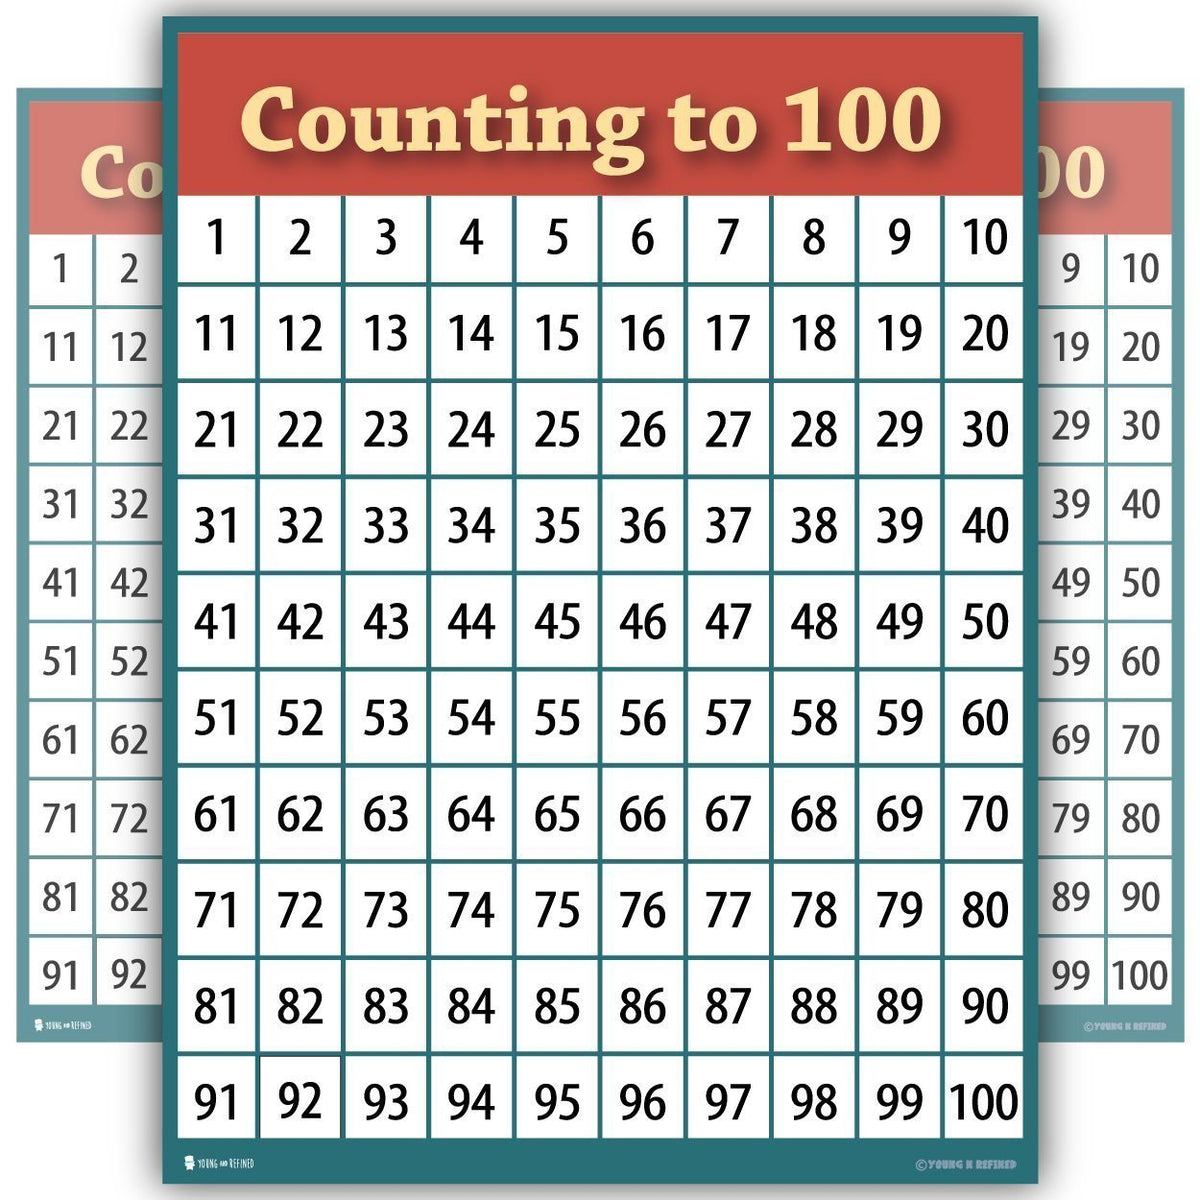 learn-counting-1-to-100-number-chart-classroom-young-n-refined